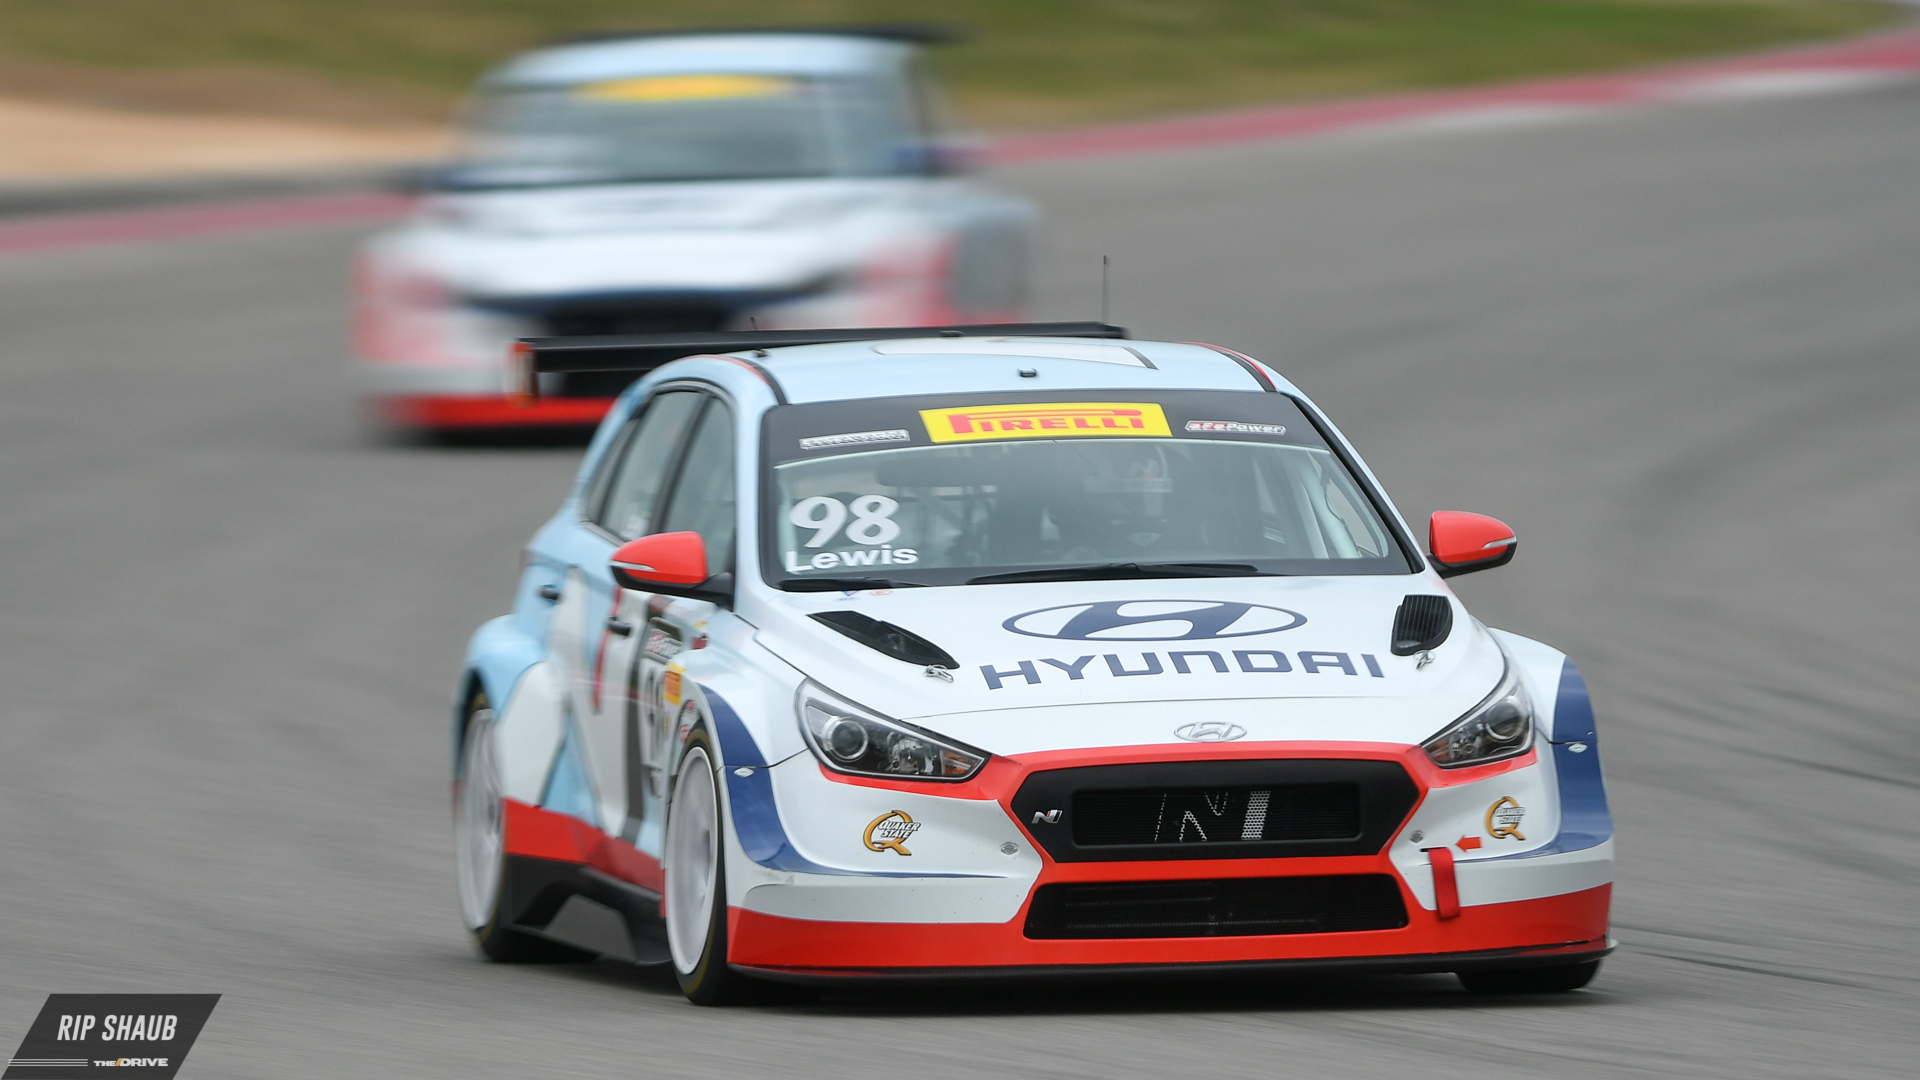 Hyundai debuted their i30 N racer and swept the top two spots in both TCR/TCA races., <i>© Rip Shaub - All Rights Reserved</i>